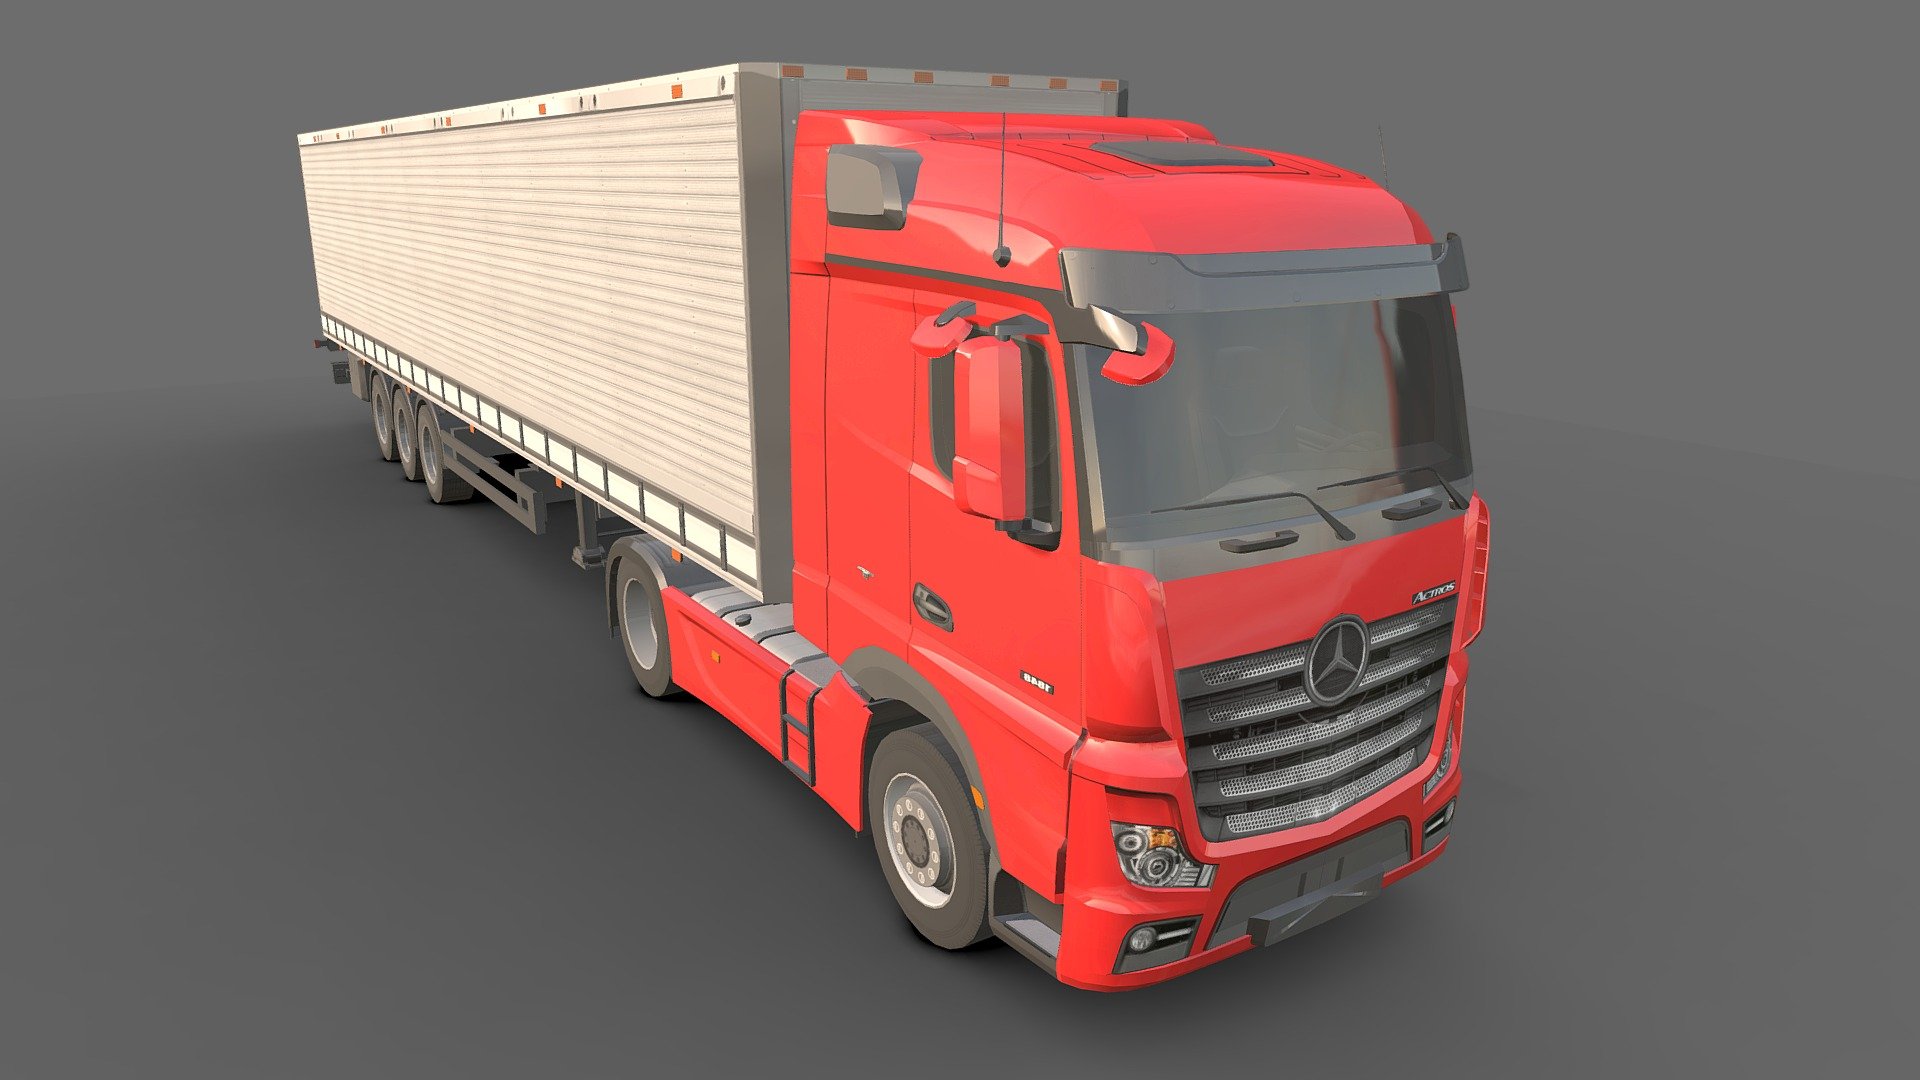 Mercedes Actros StreamSpase

Low-poly

Average poly count : 40,000

Average number of vertices : 30,000

Textures : 4096 / 2048

Formats .( FBX , OBJ , 3D MAX ).

High quality texture.

Isolated parts (Door, steering wheel, wheels, body).

Its dashboard is simple.

You can use this model in all games 3d model